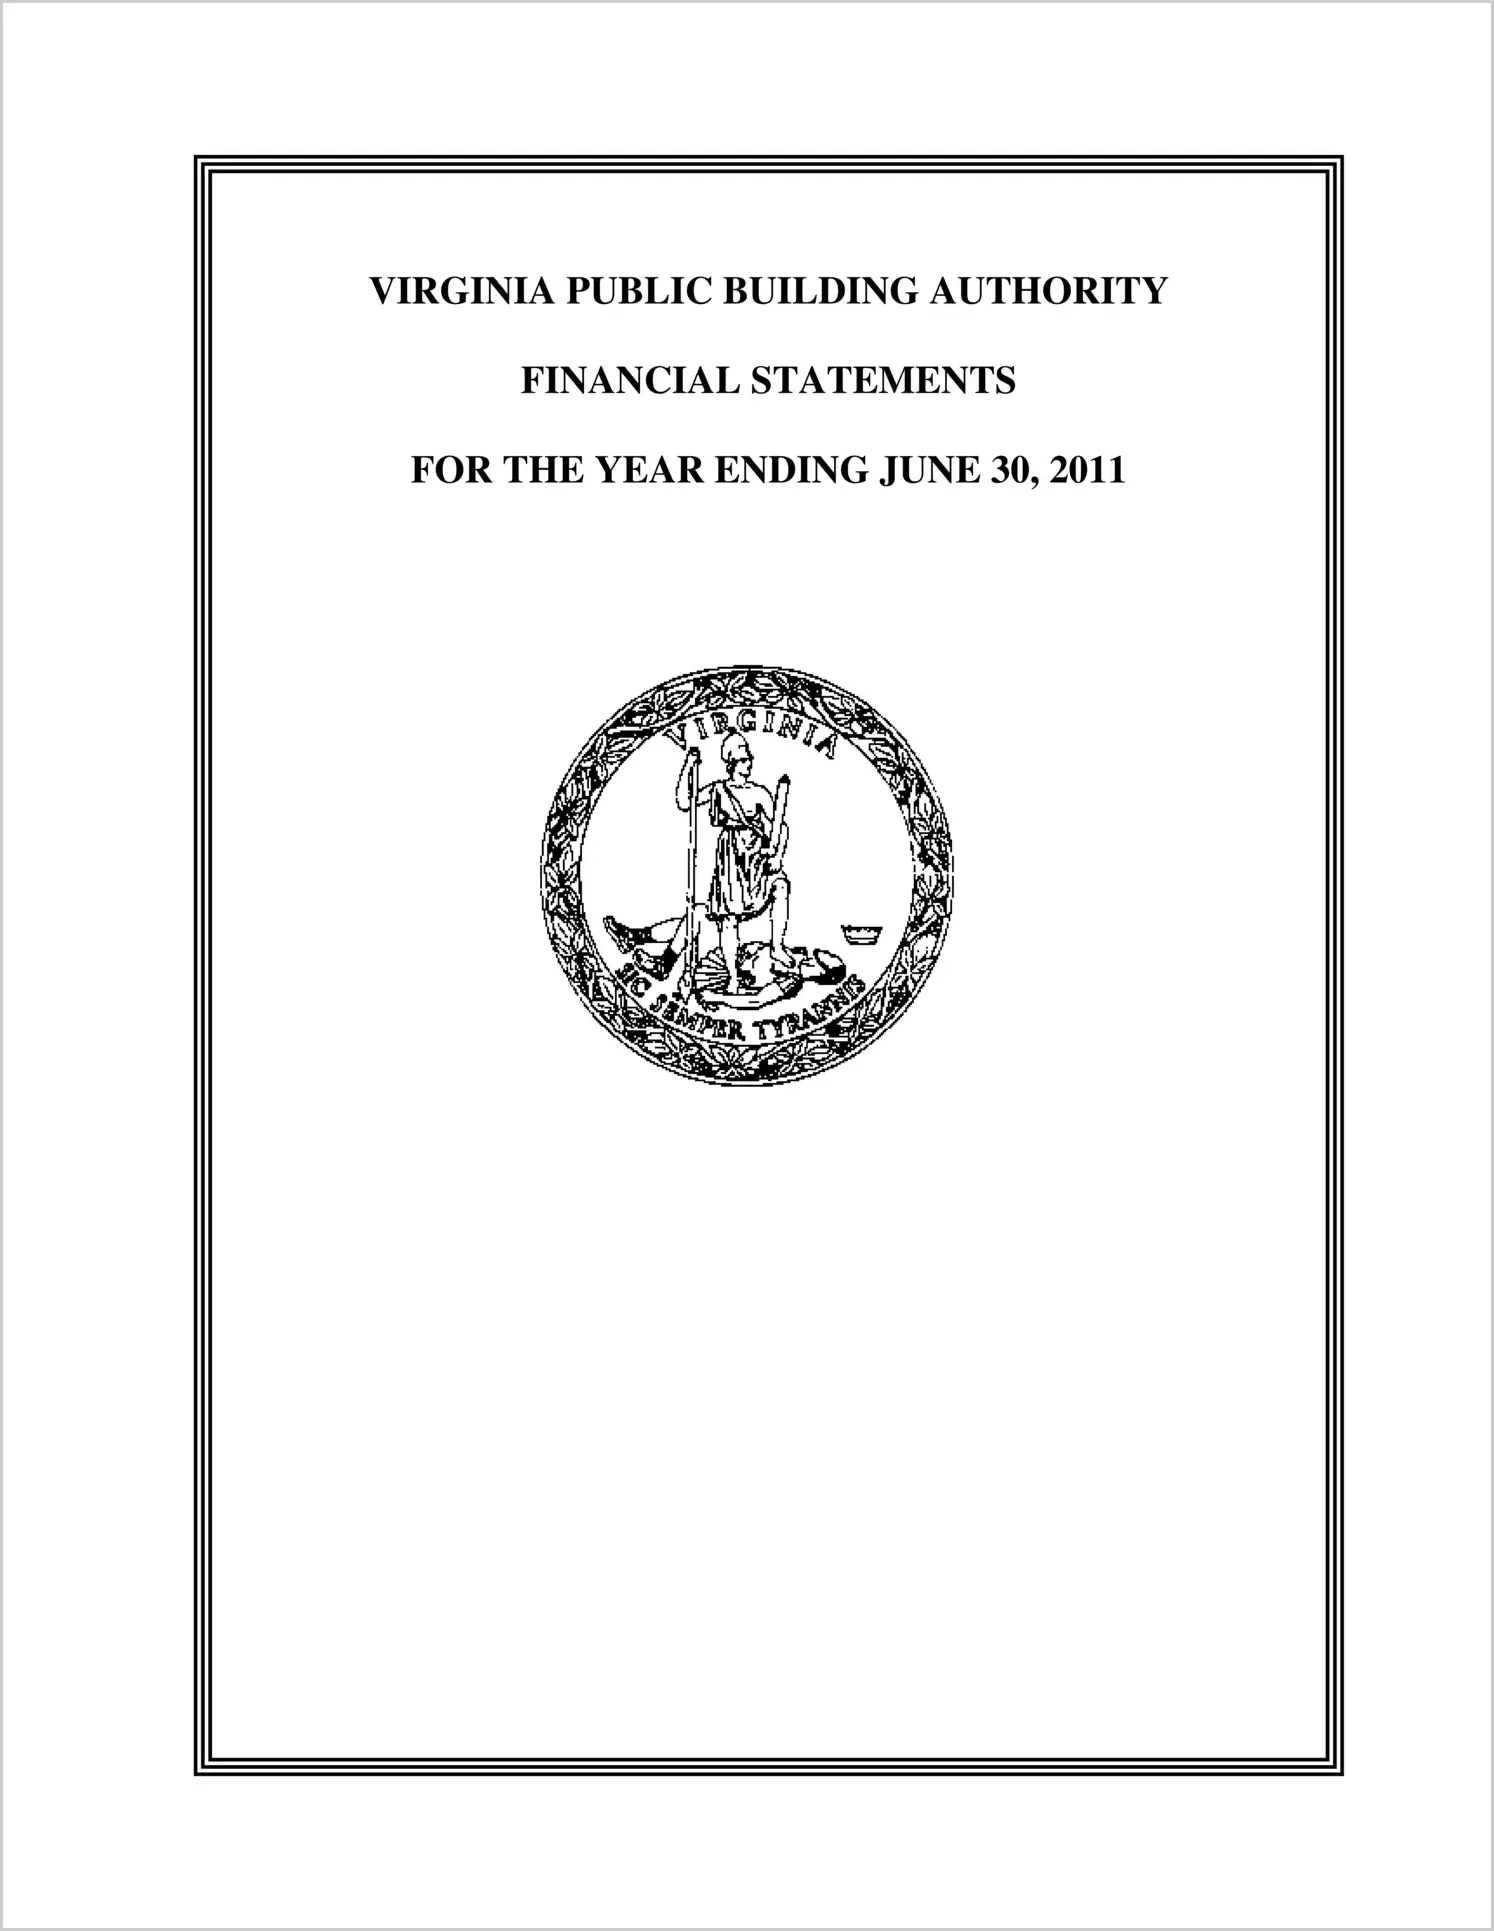 Virginia Public Building Authority Financial Statements for the year ended June 30, 2011